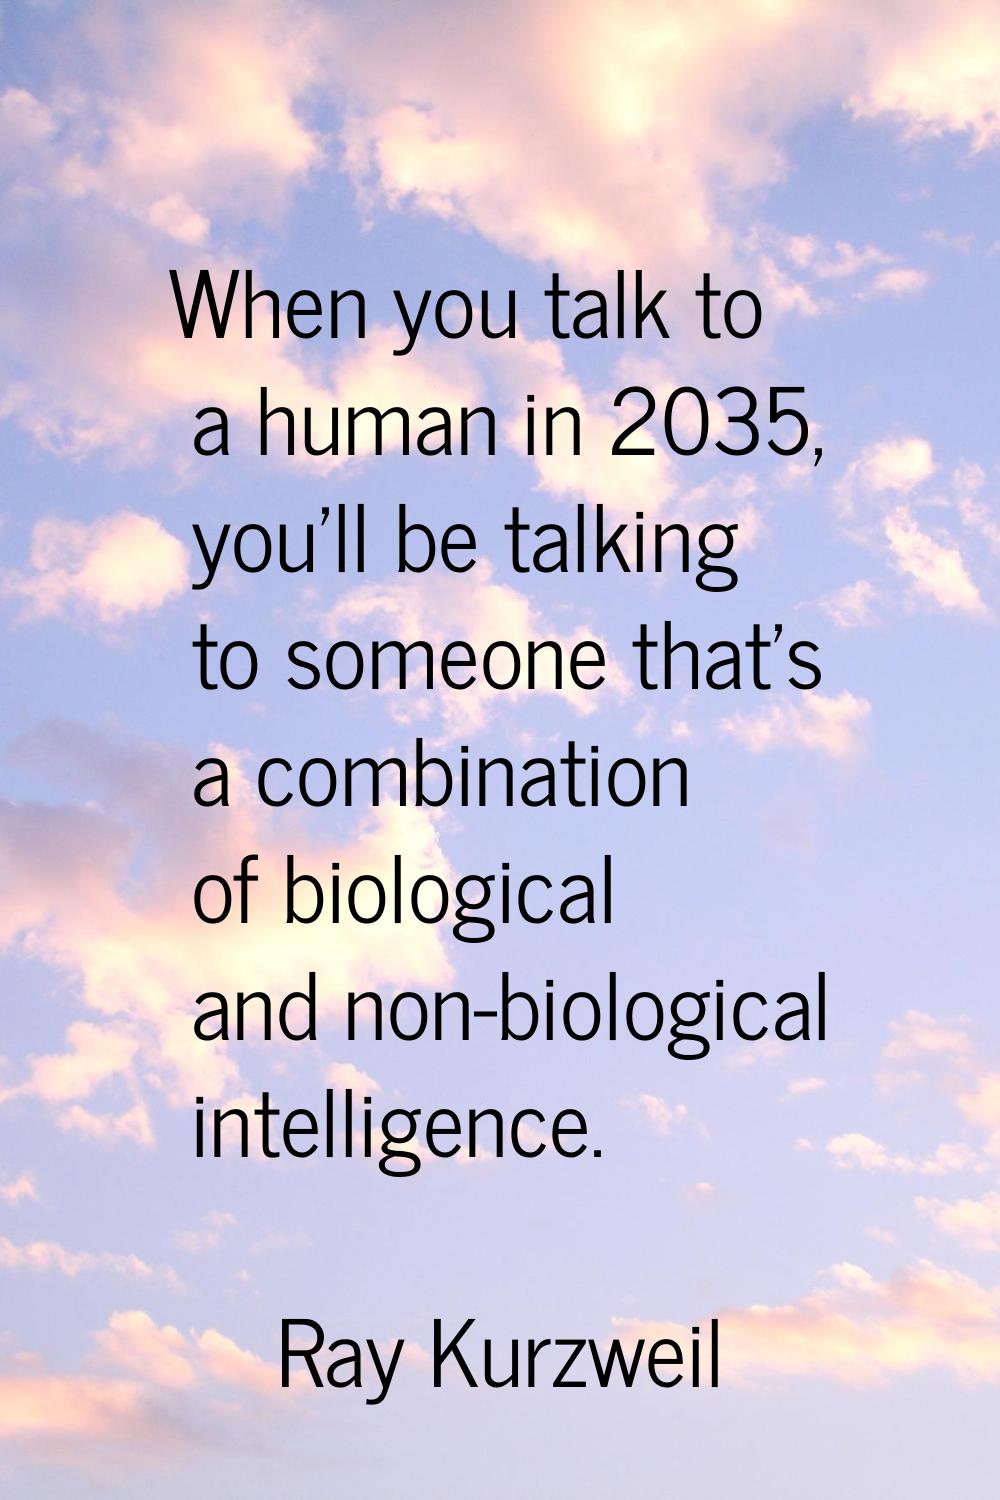 When you talk to a human in 2035, you'll be talking to someone that's a combination of biological a